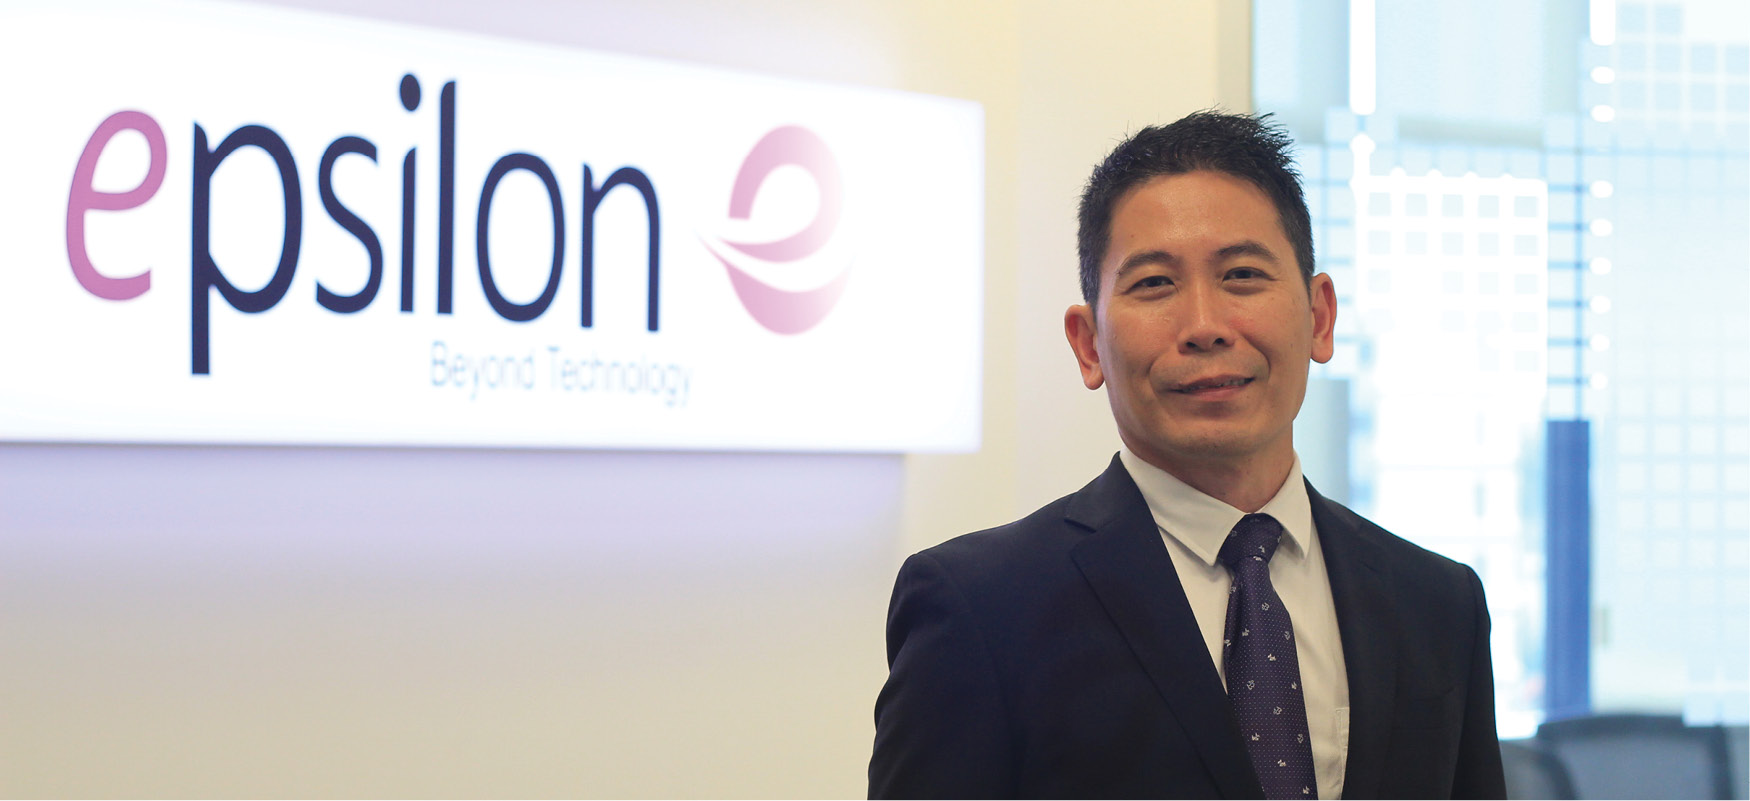 Epsilon Appoints Raymond Yeo as Chief Financial Officer